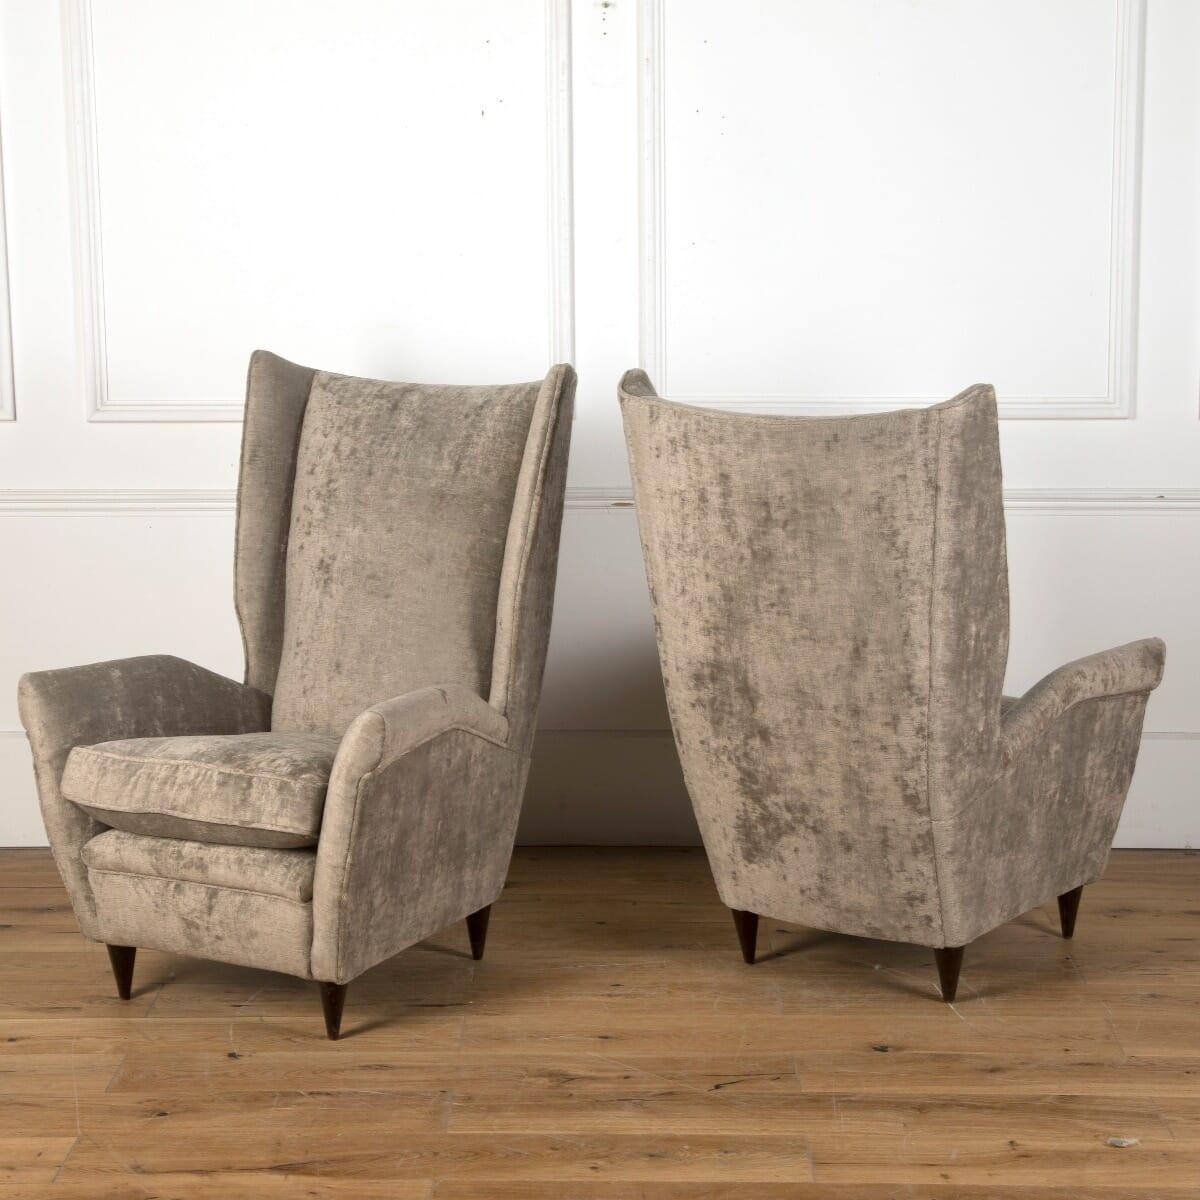 A pair of mid-20th century Italian upholstered armchairs, design attributed to Gio Ponti (1891-1979) and manufactured by ISA Bergamo. Velvet upholstery by GP and J Baker.